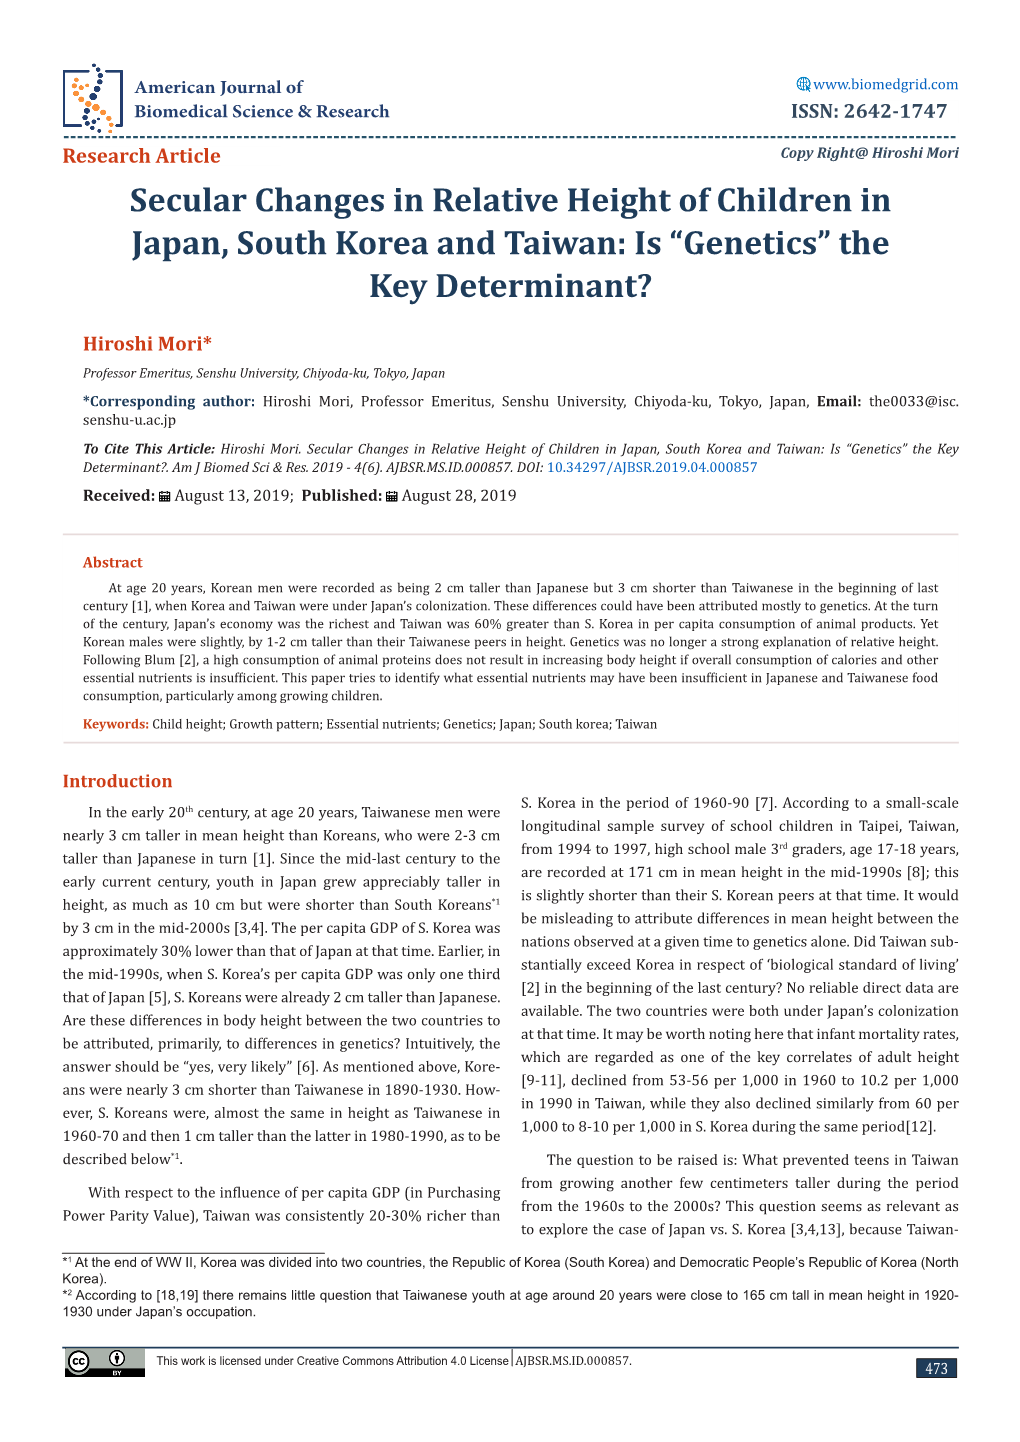 Secular Changes in Relative Height of Children in Japan, South Korea and Taiwan: Is “Genetics” the Key Determinant?